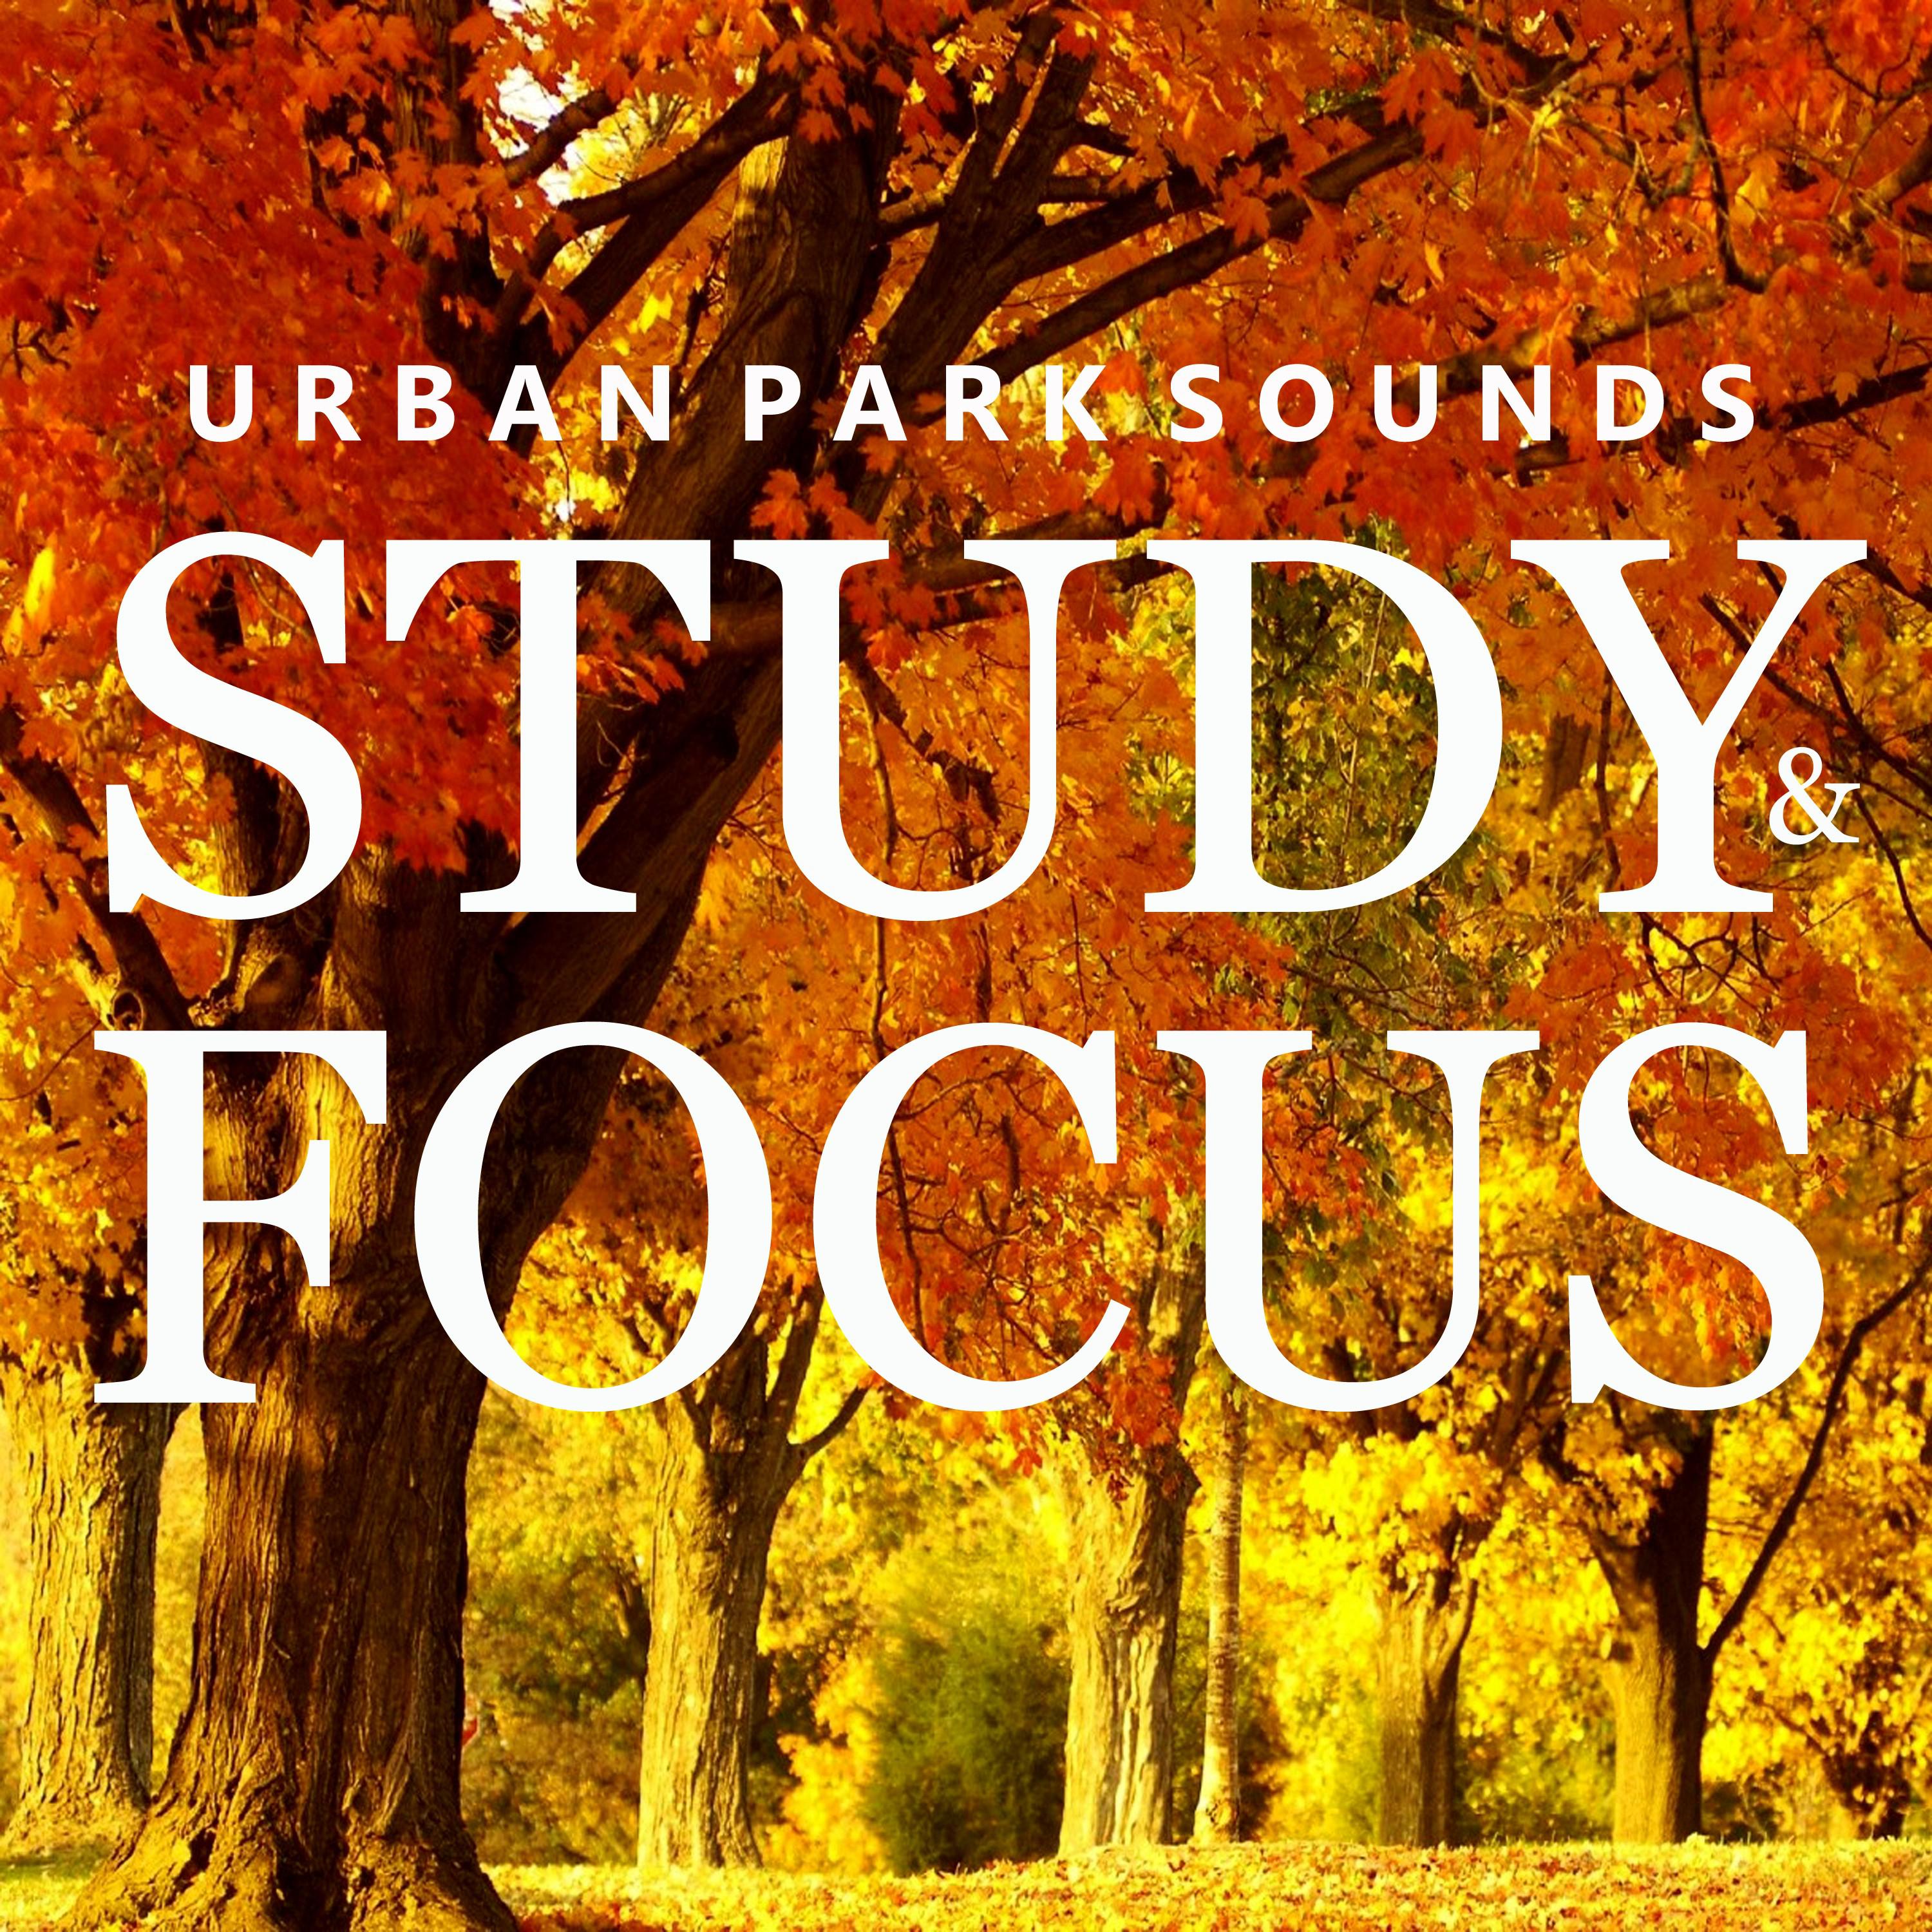 Urban Park Sounds for Studying, Pt. 11